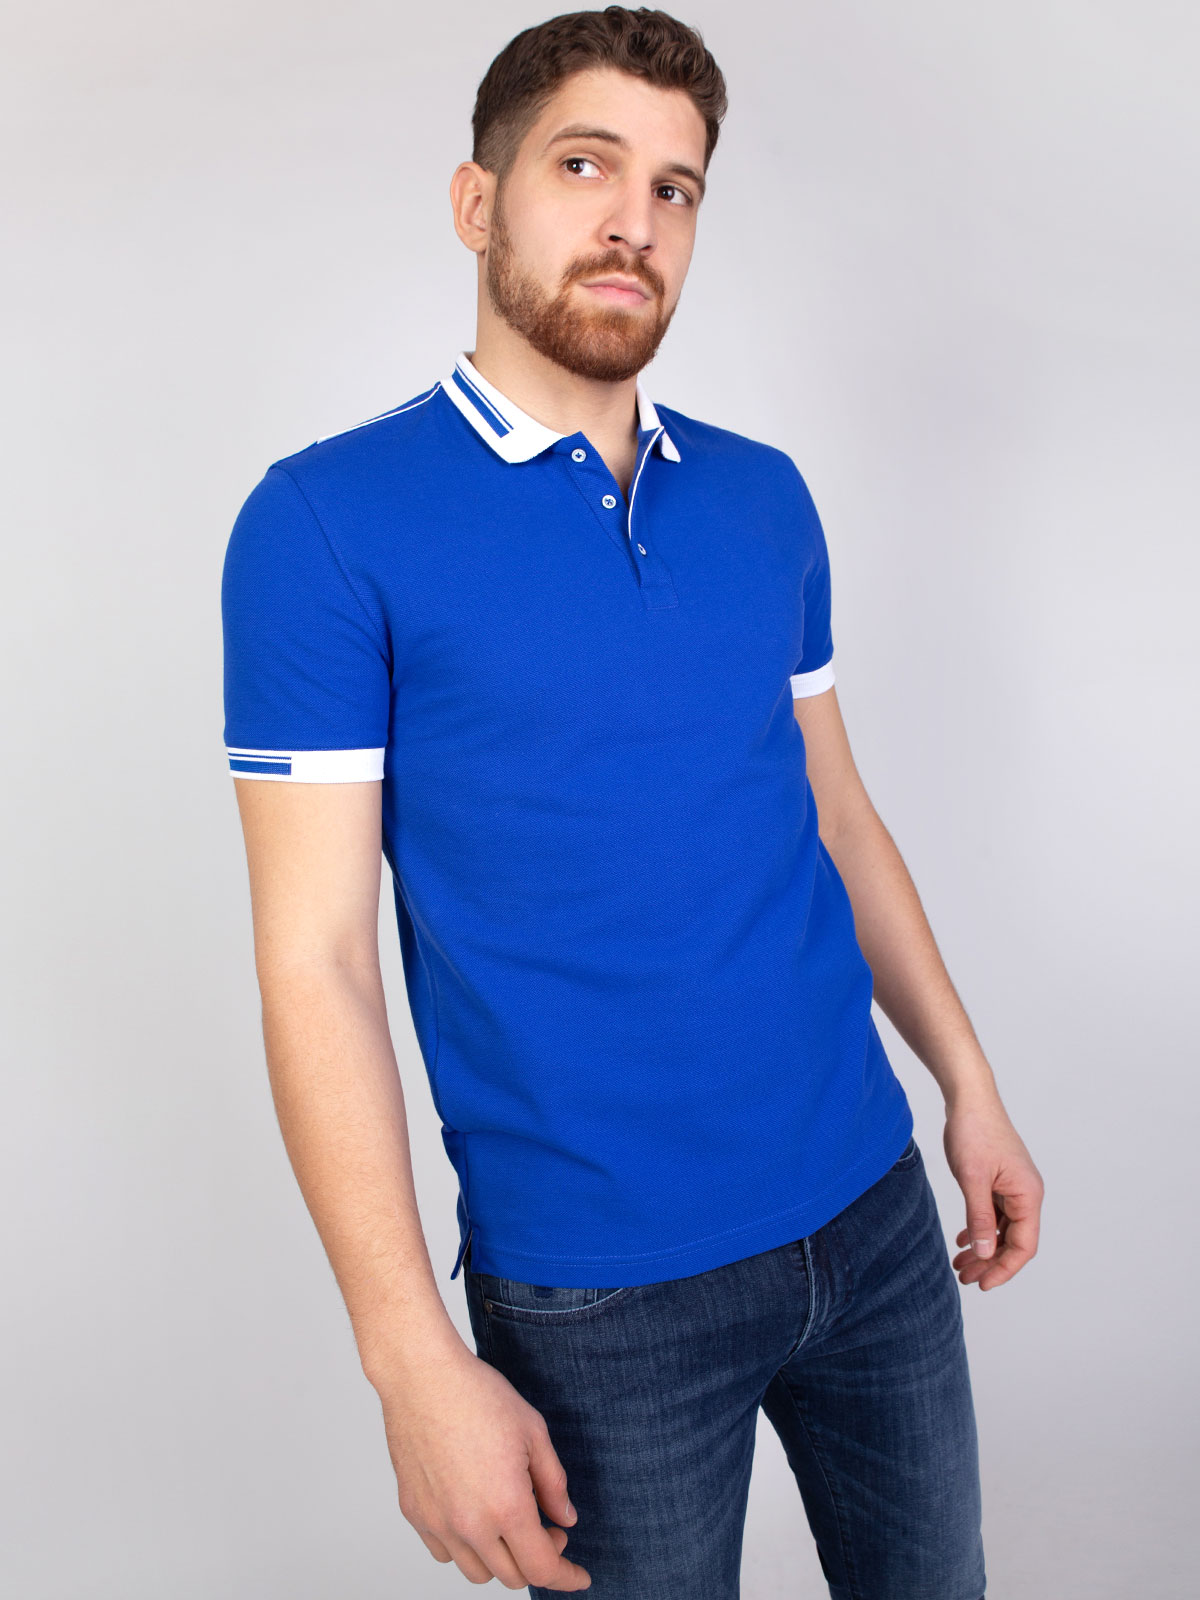 Blouse in royal blue with collar in whi - 93398 € 20.25 img2